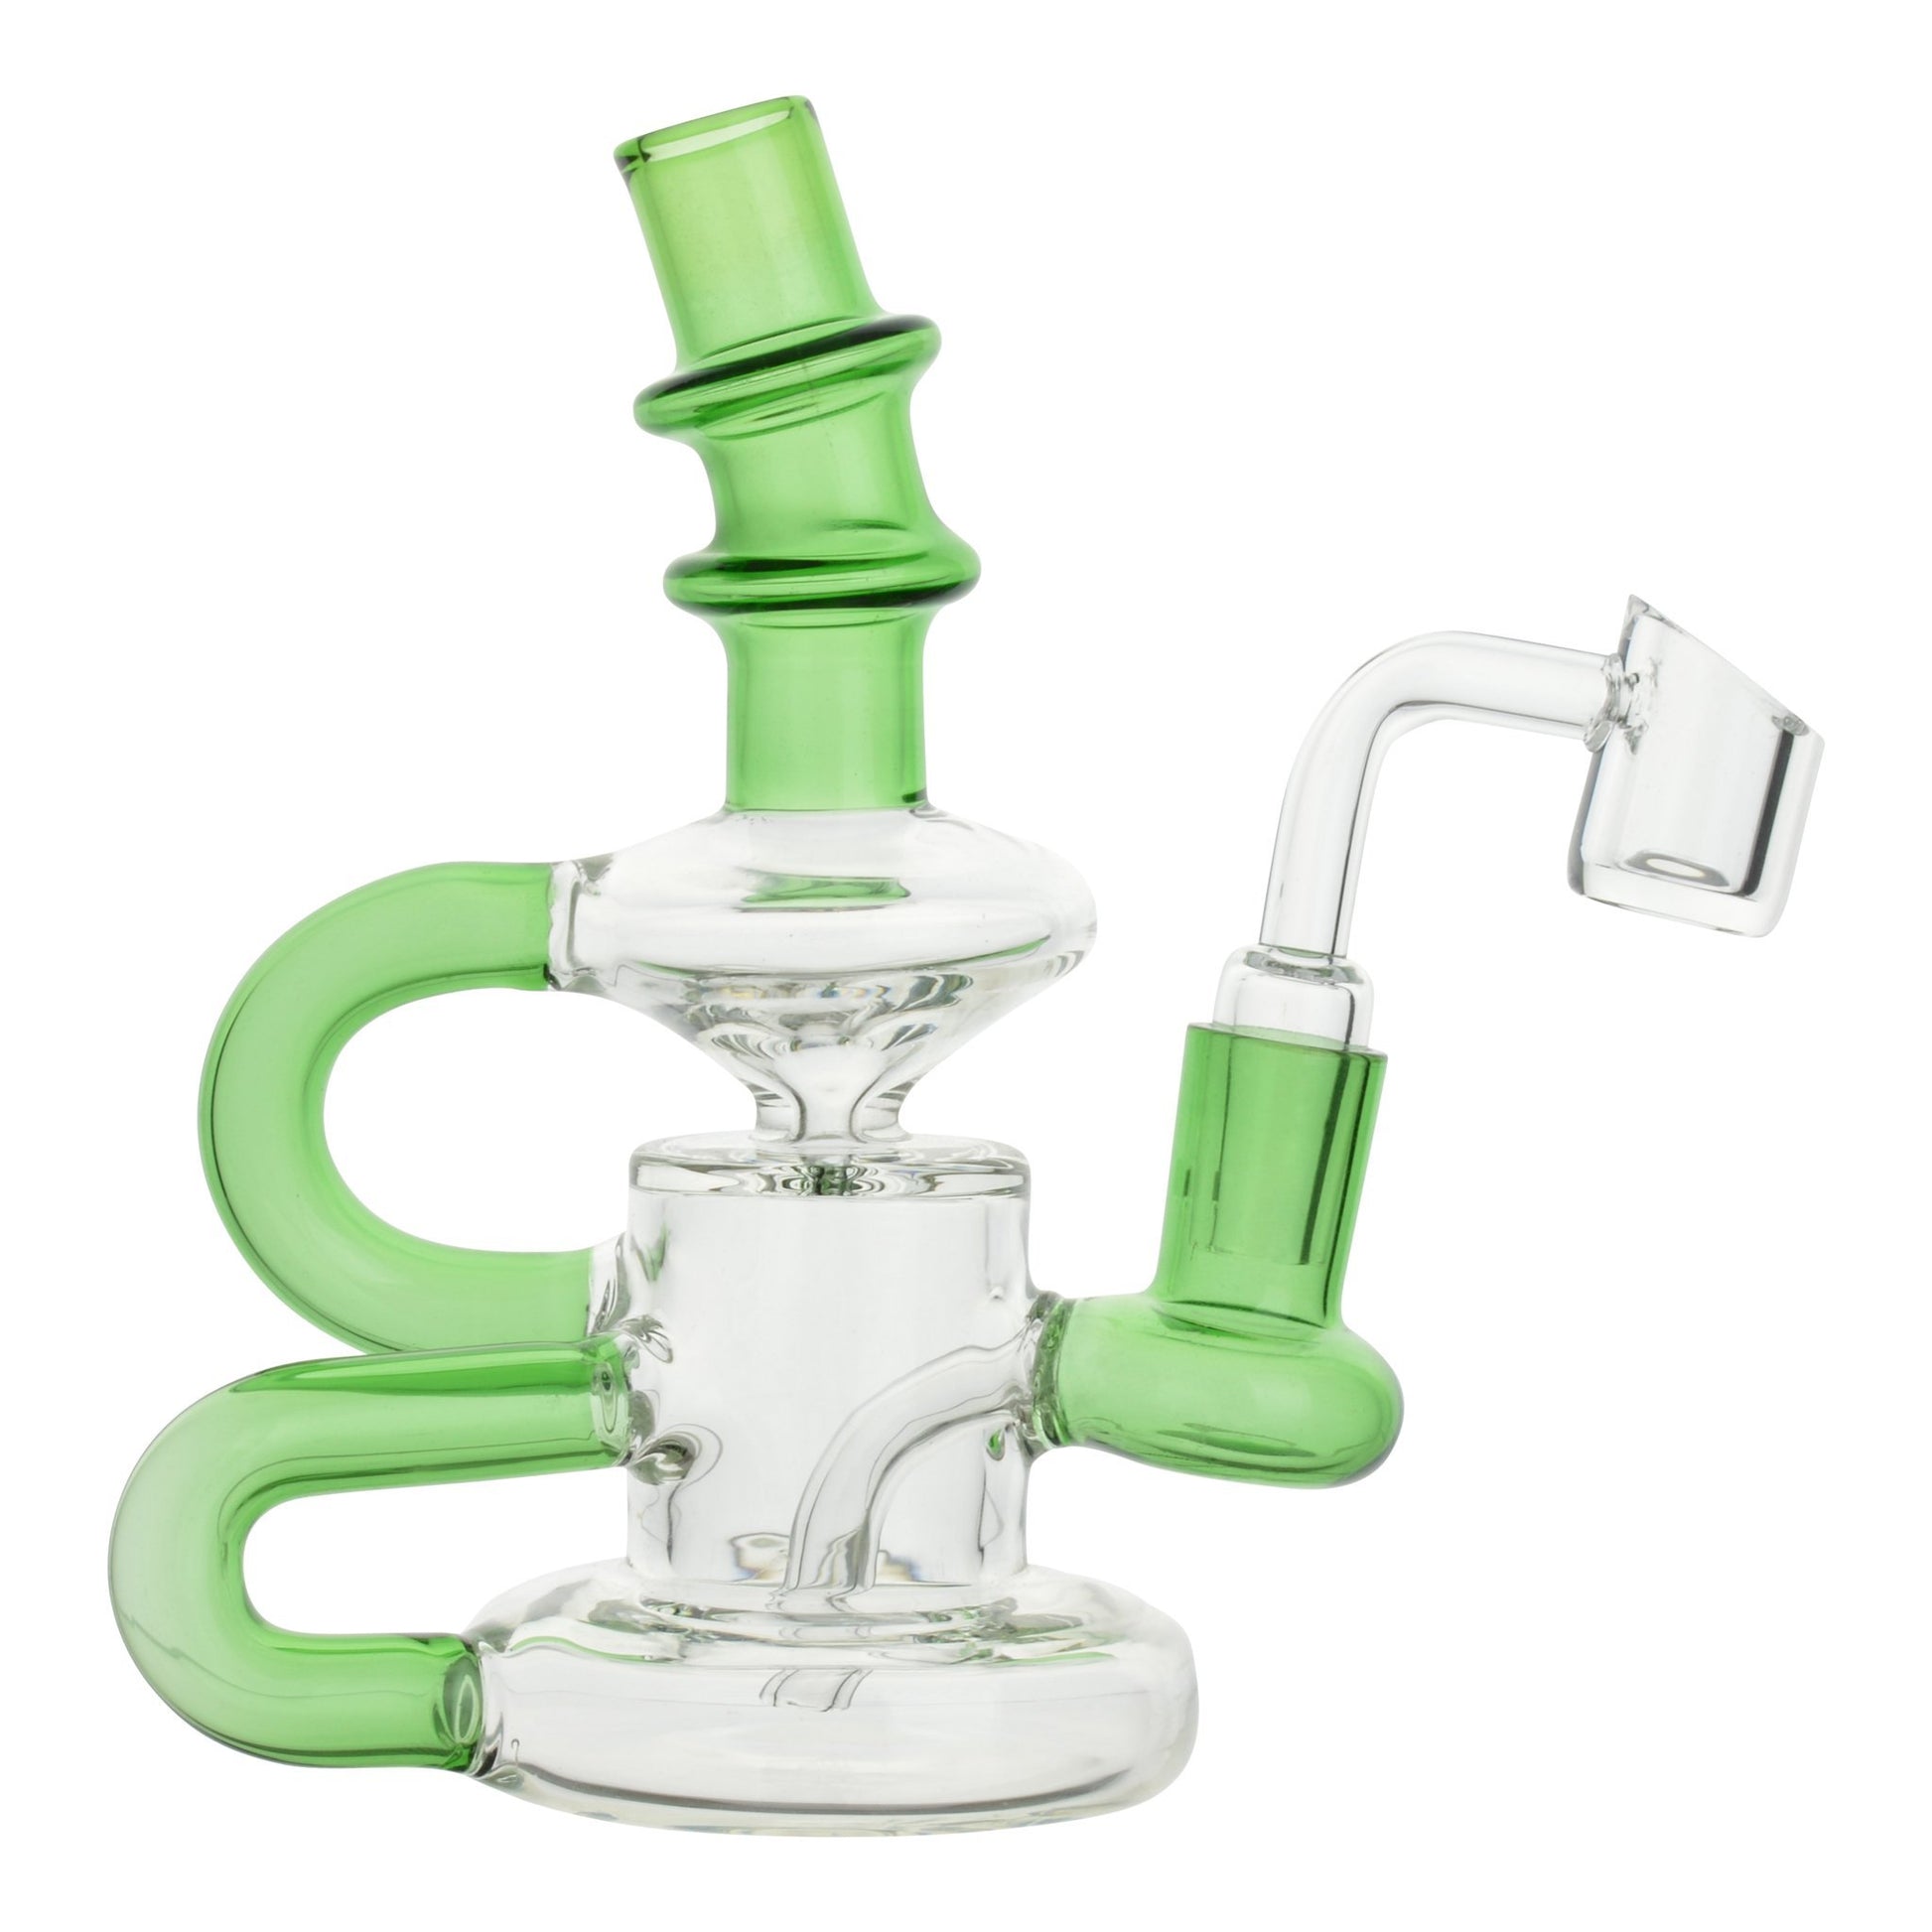 Full front shot of 6 inch glass dab rig green and clear colors mouthpiece facing left banger on the right spiral B shape